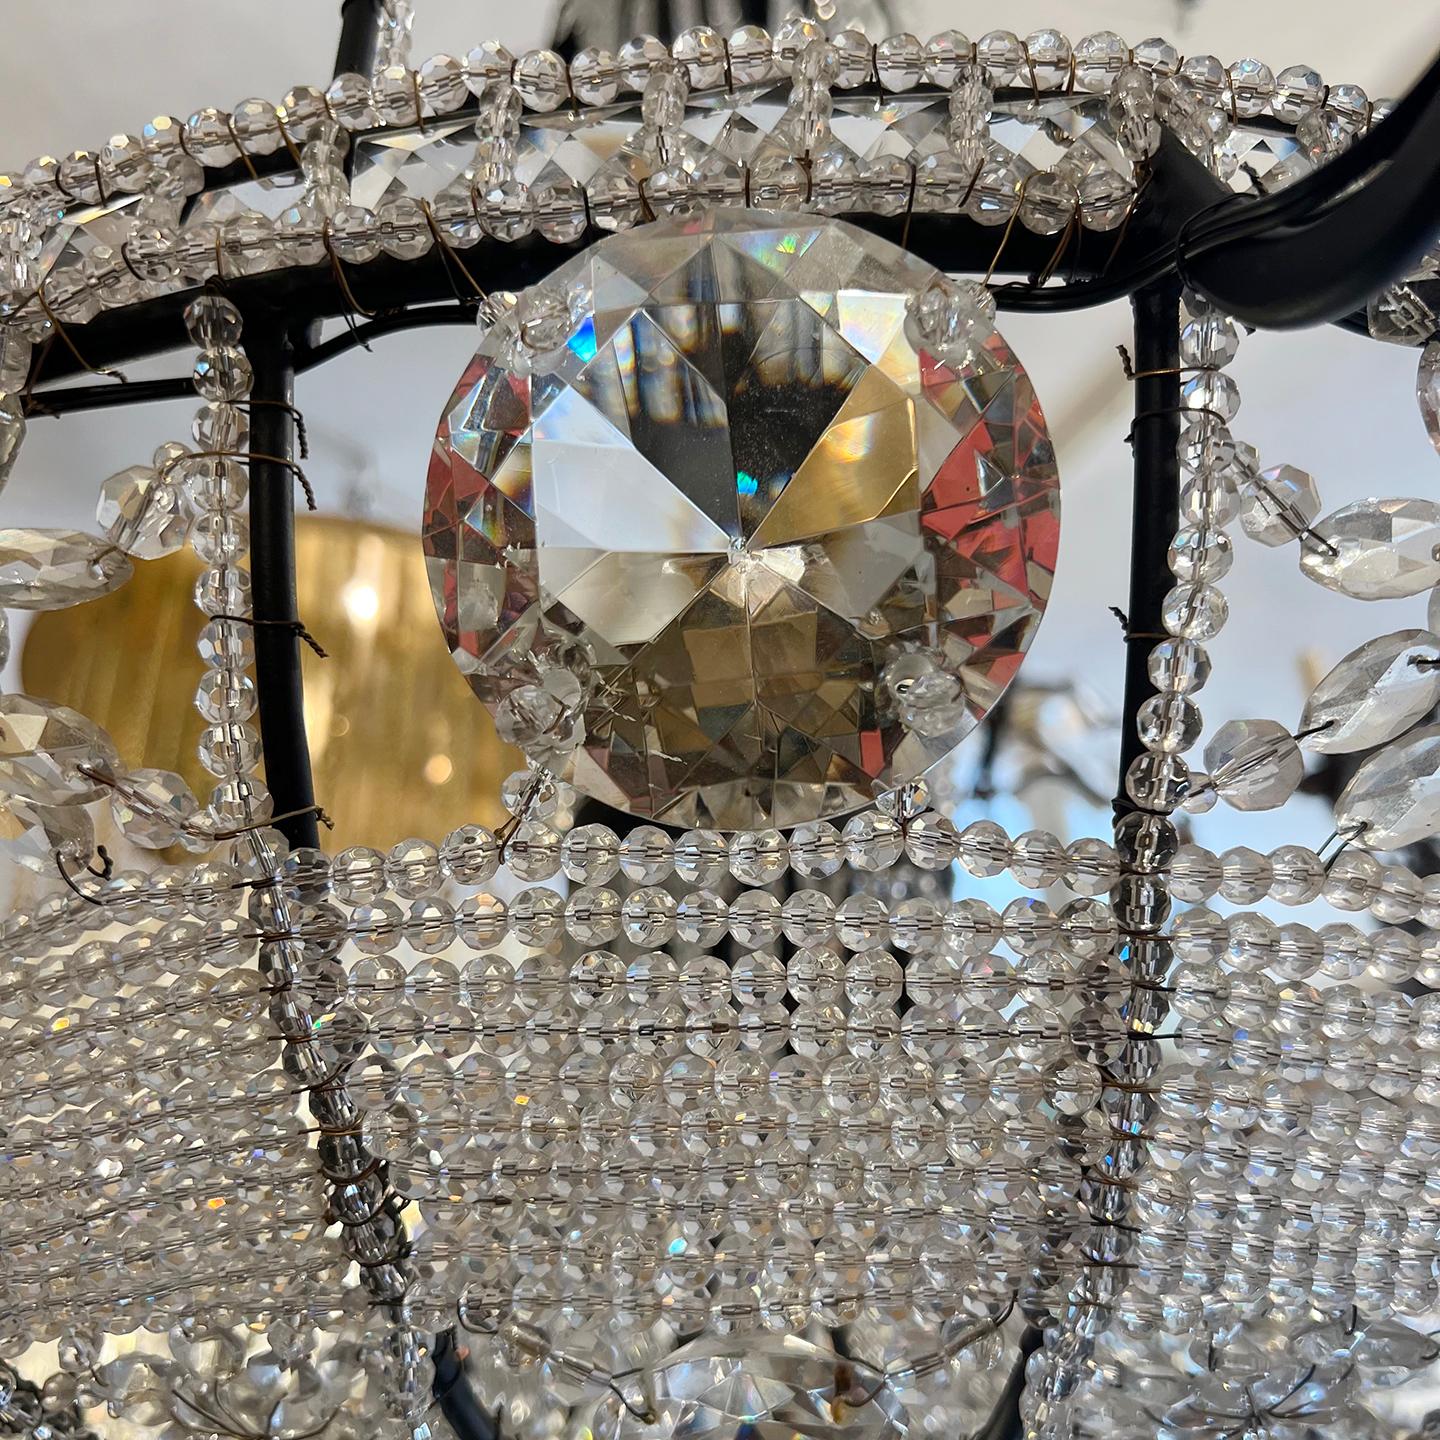 A circa 1950s French crystals chandelier with 10 lights.

Measurements:
Height: 49